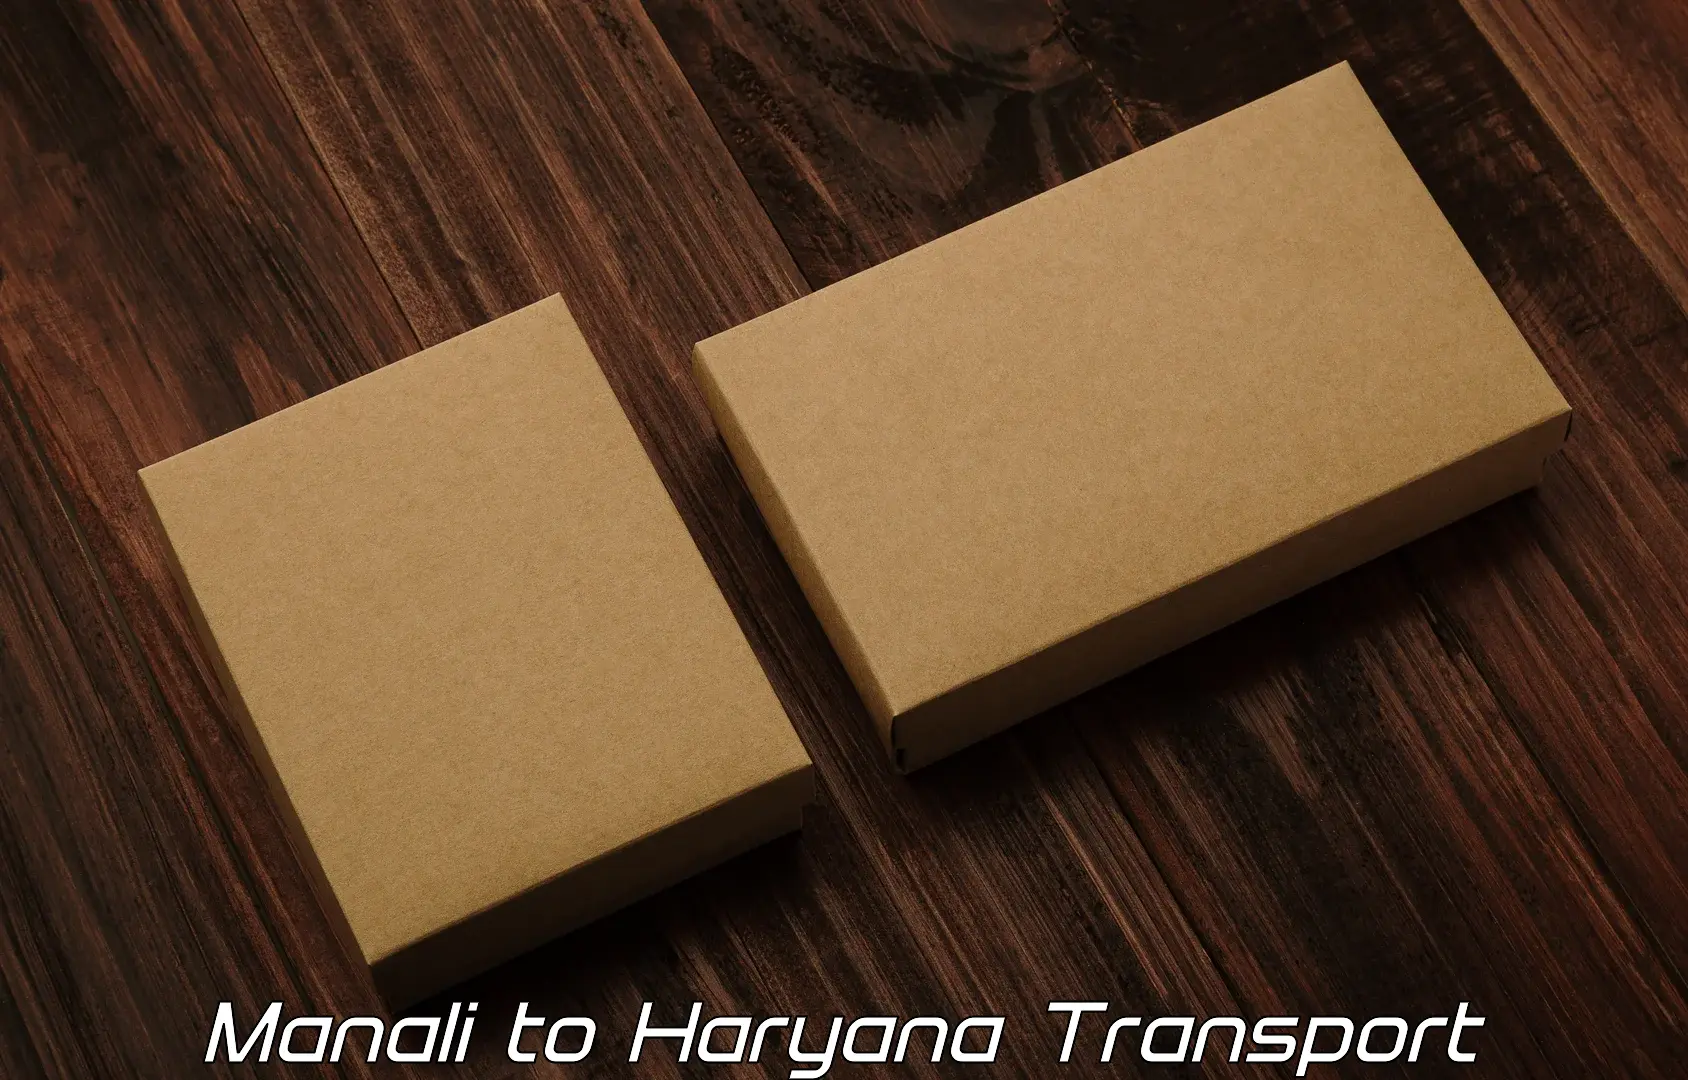 Daily parcel service transport Manali to Gurgaon